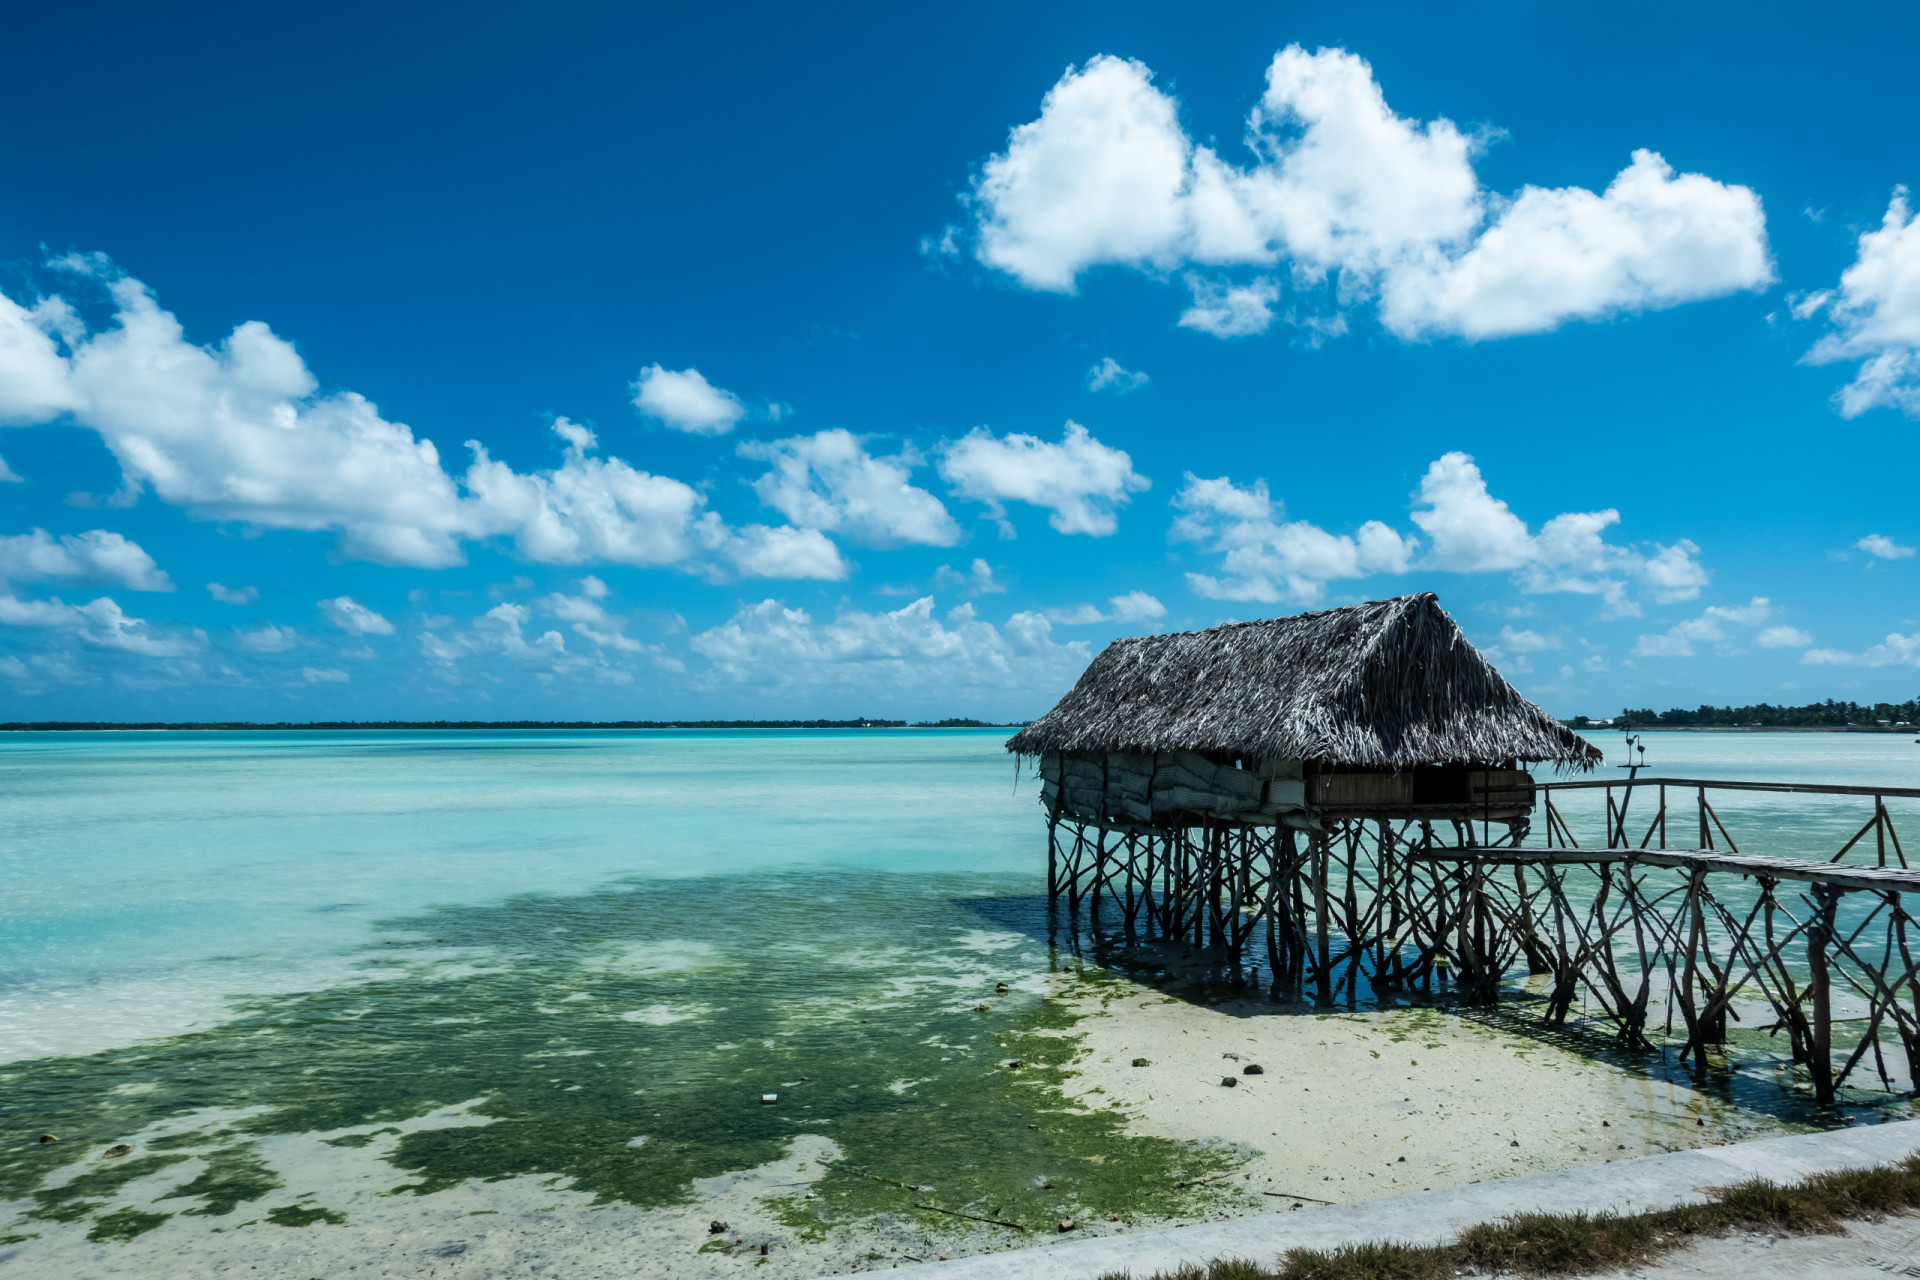 <p>Despite its vast maritime area, Kiribati’s total land area is only about 313 sq miles (811 sq km), which makes it one of the smallest countries in the world.</p><p>You may also like:<a href="https://www.starsinsider.com/n/96907?utm_source=msn.com&utm_medium=display&utm_campaign=referral_description&utm_content=717375en-us"> How do photographers capture those priceless shots?</a></p>